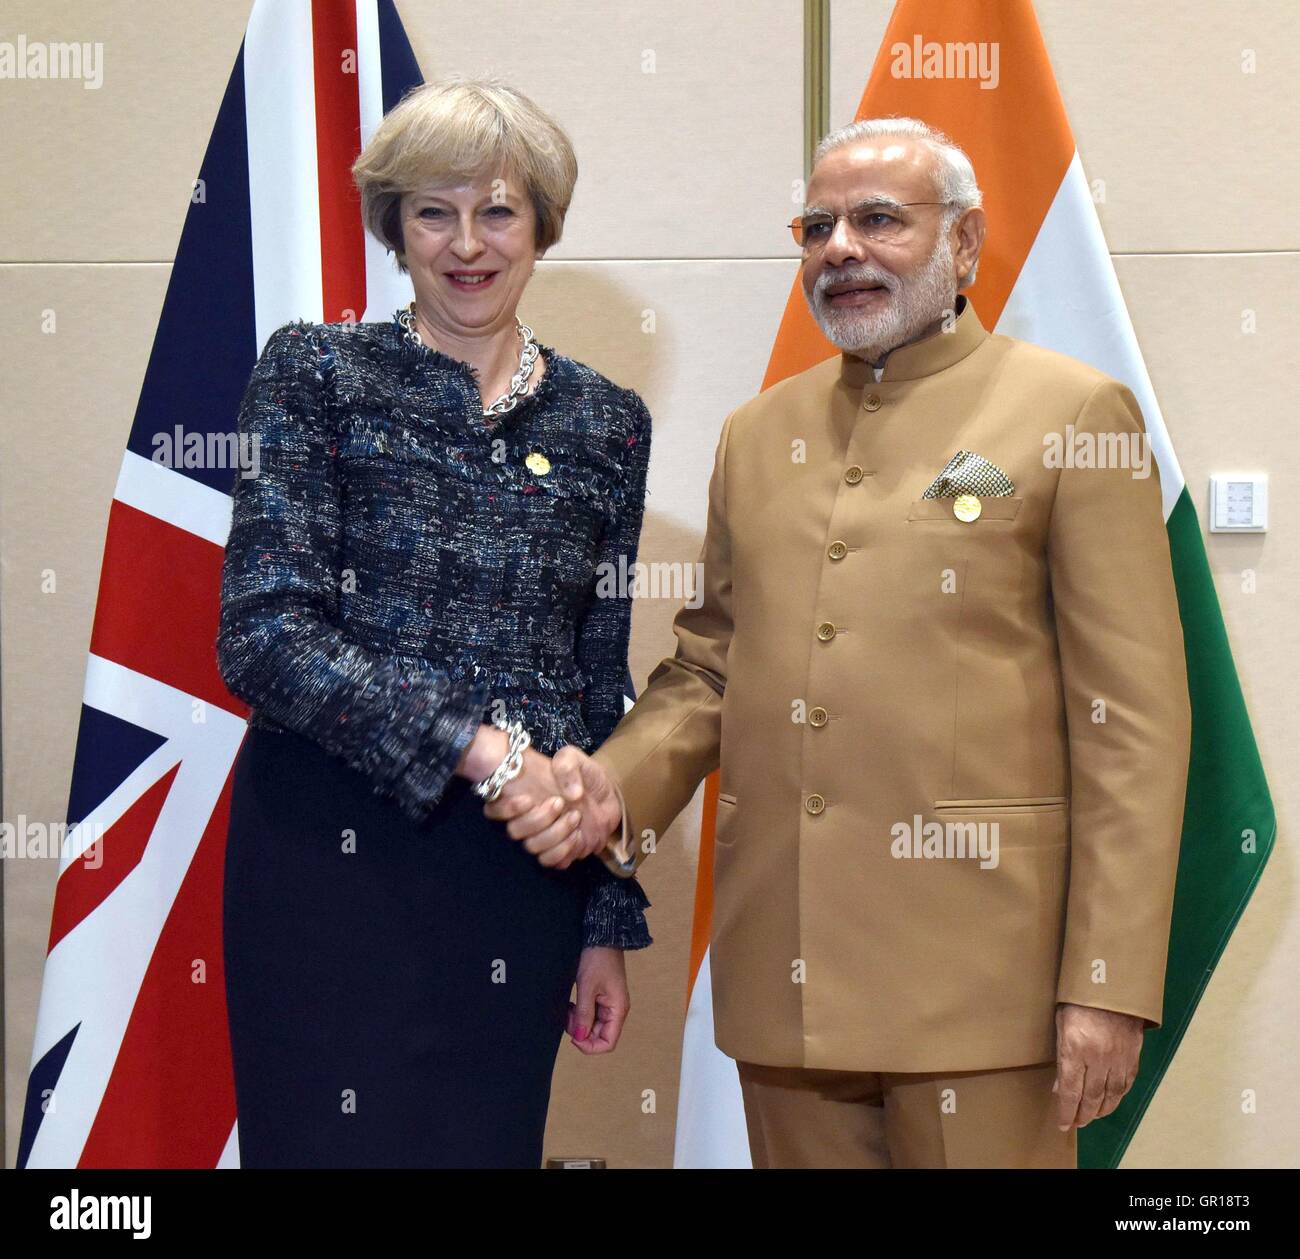 Hangzhou, China. 5th September, 2016. Indian Prime Minister Narendra Modi greets British Prime Minister Theresa May before the start of their bilateral meeting on the sidelines of the G20 Summit  September 5, 2016 in Hangzhou, China. Credit:  Planetpix/Alamy Live News Stock Photo